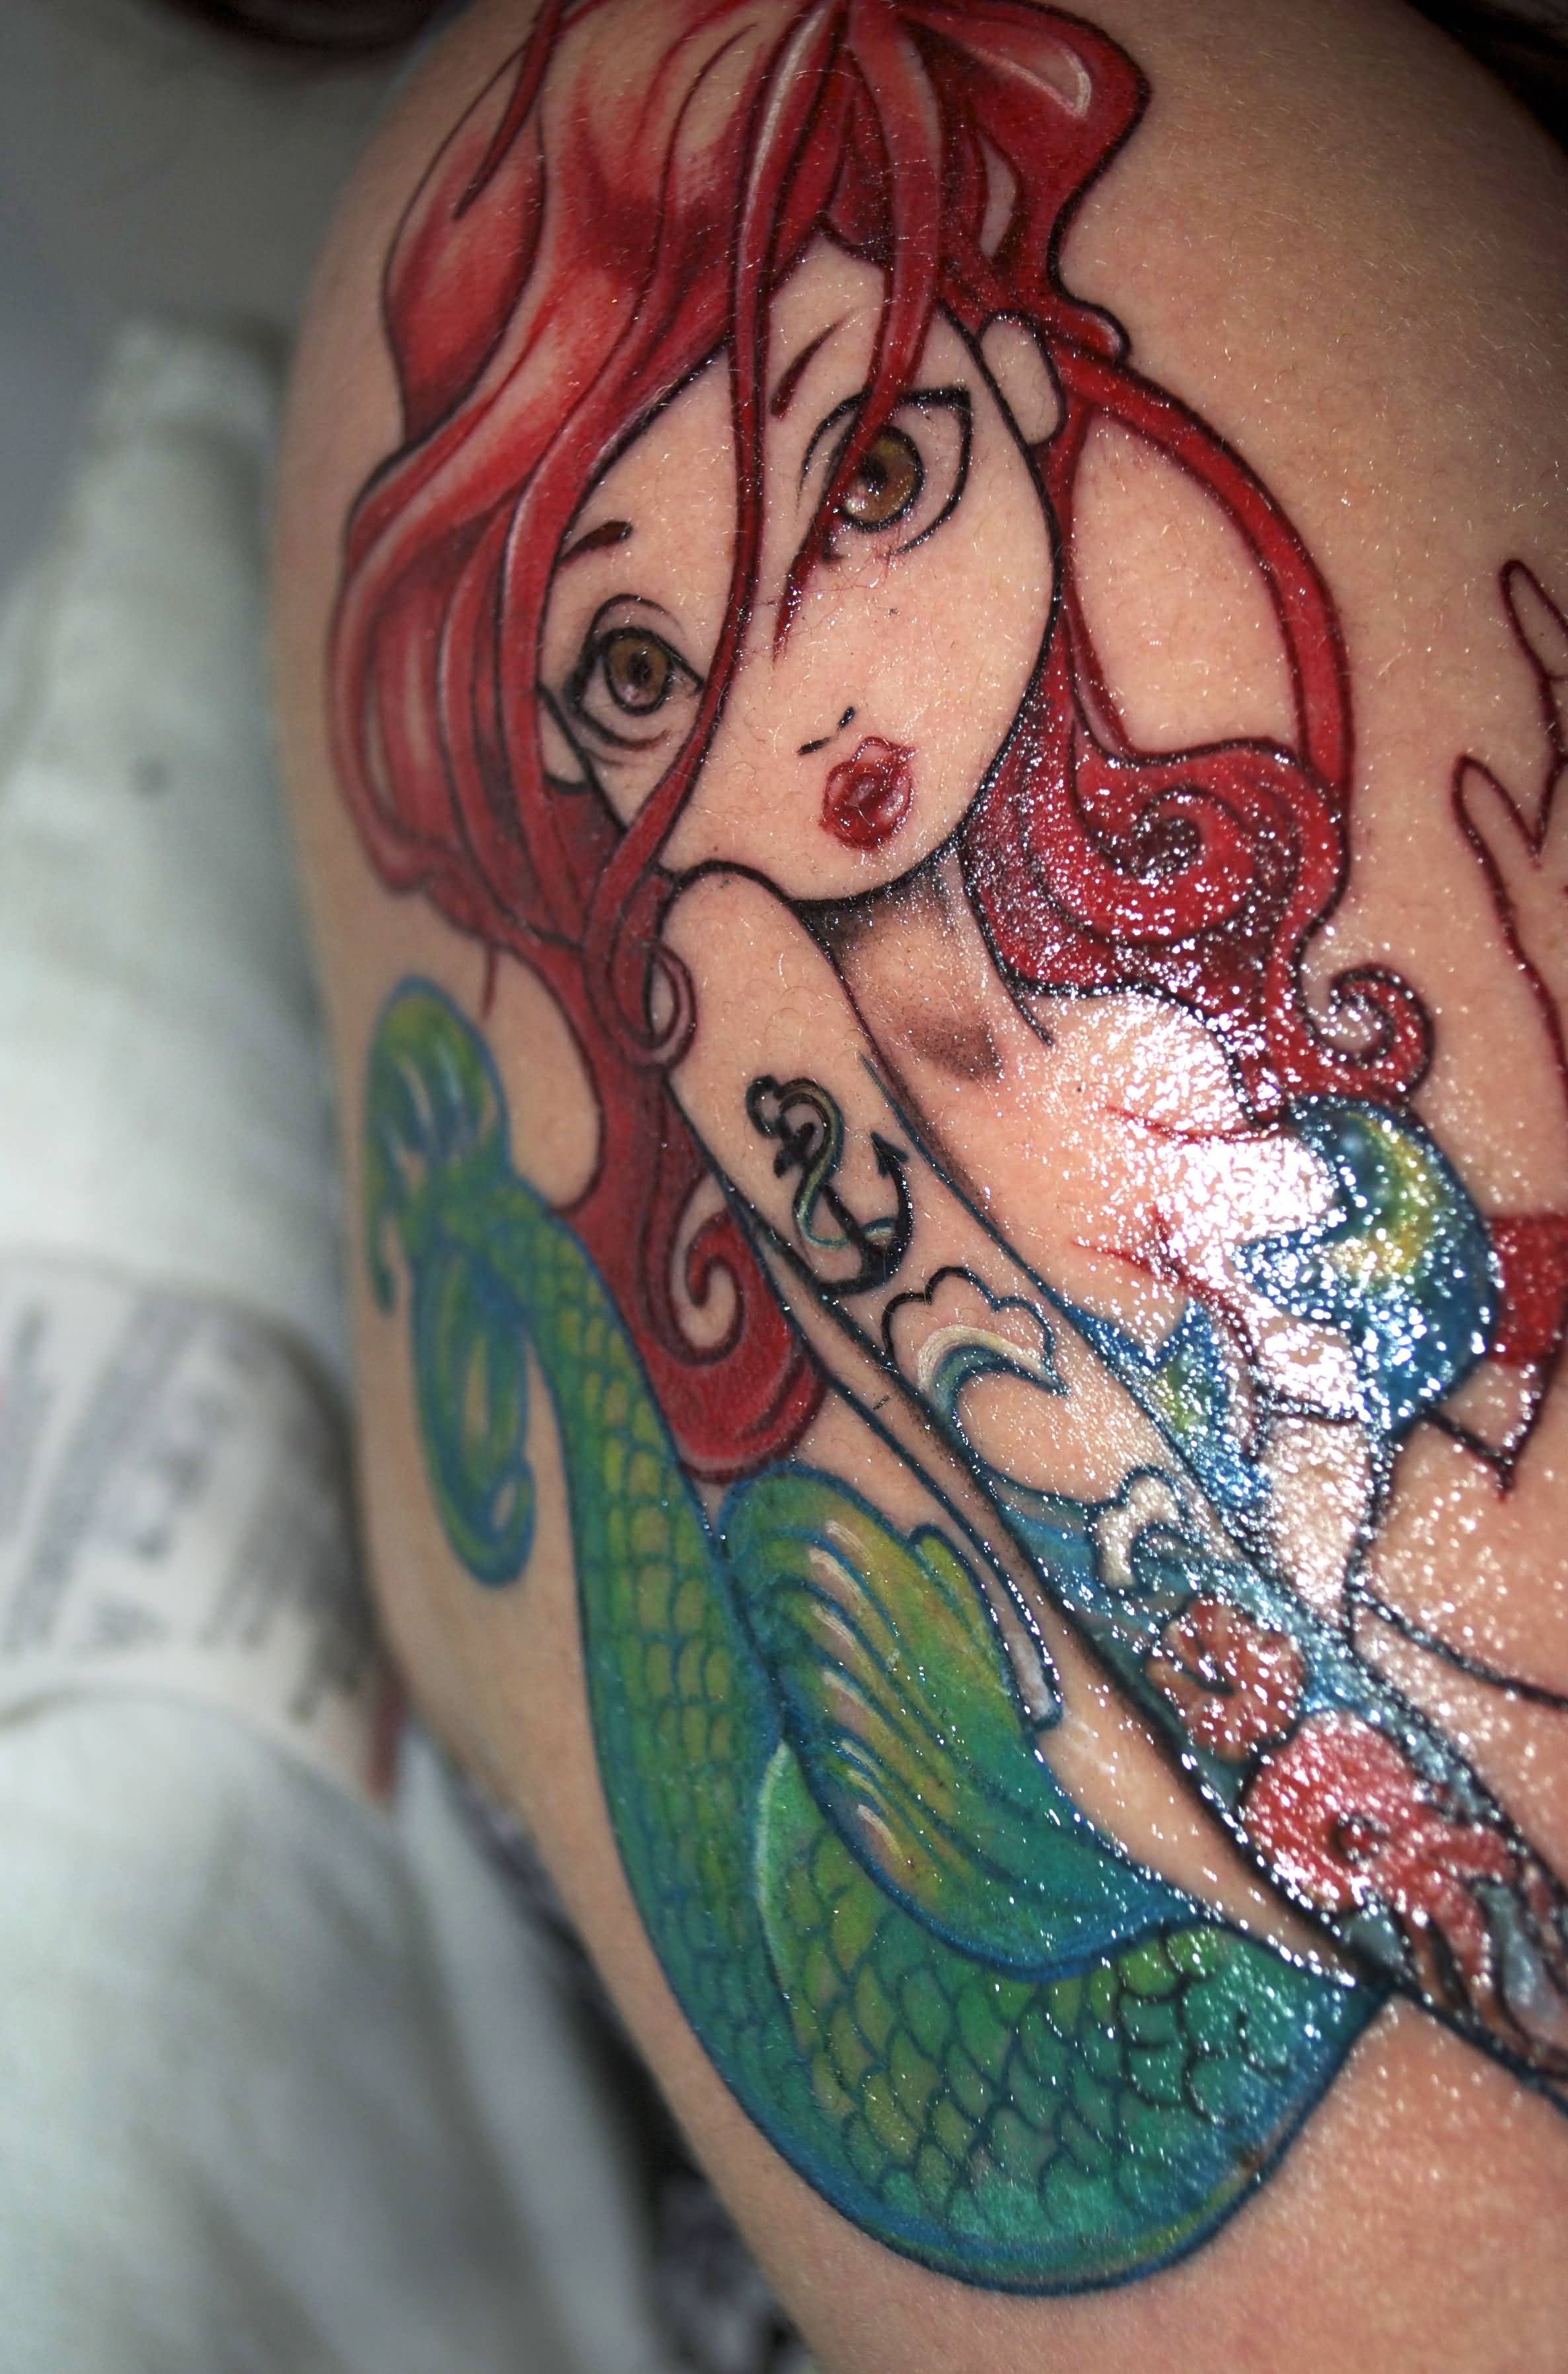 Colorful Mermaid Tattoo On Right Shoulder